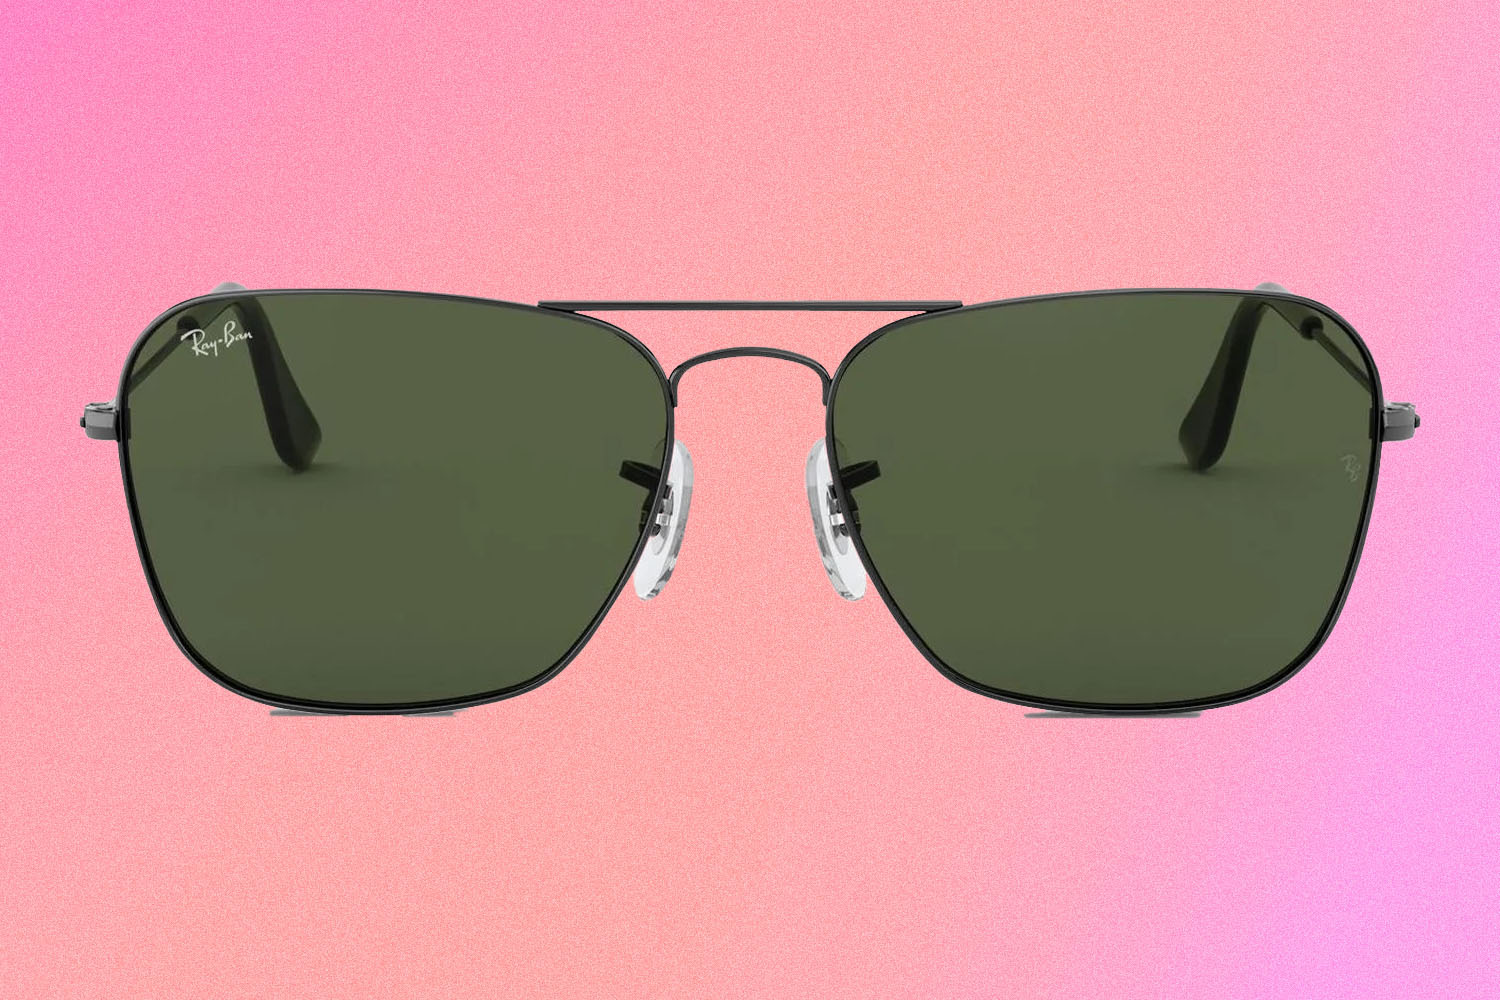 A pair of Ray-Ban Caravan RB3136 green-lensed aviator sunglasses on a pink and red background.